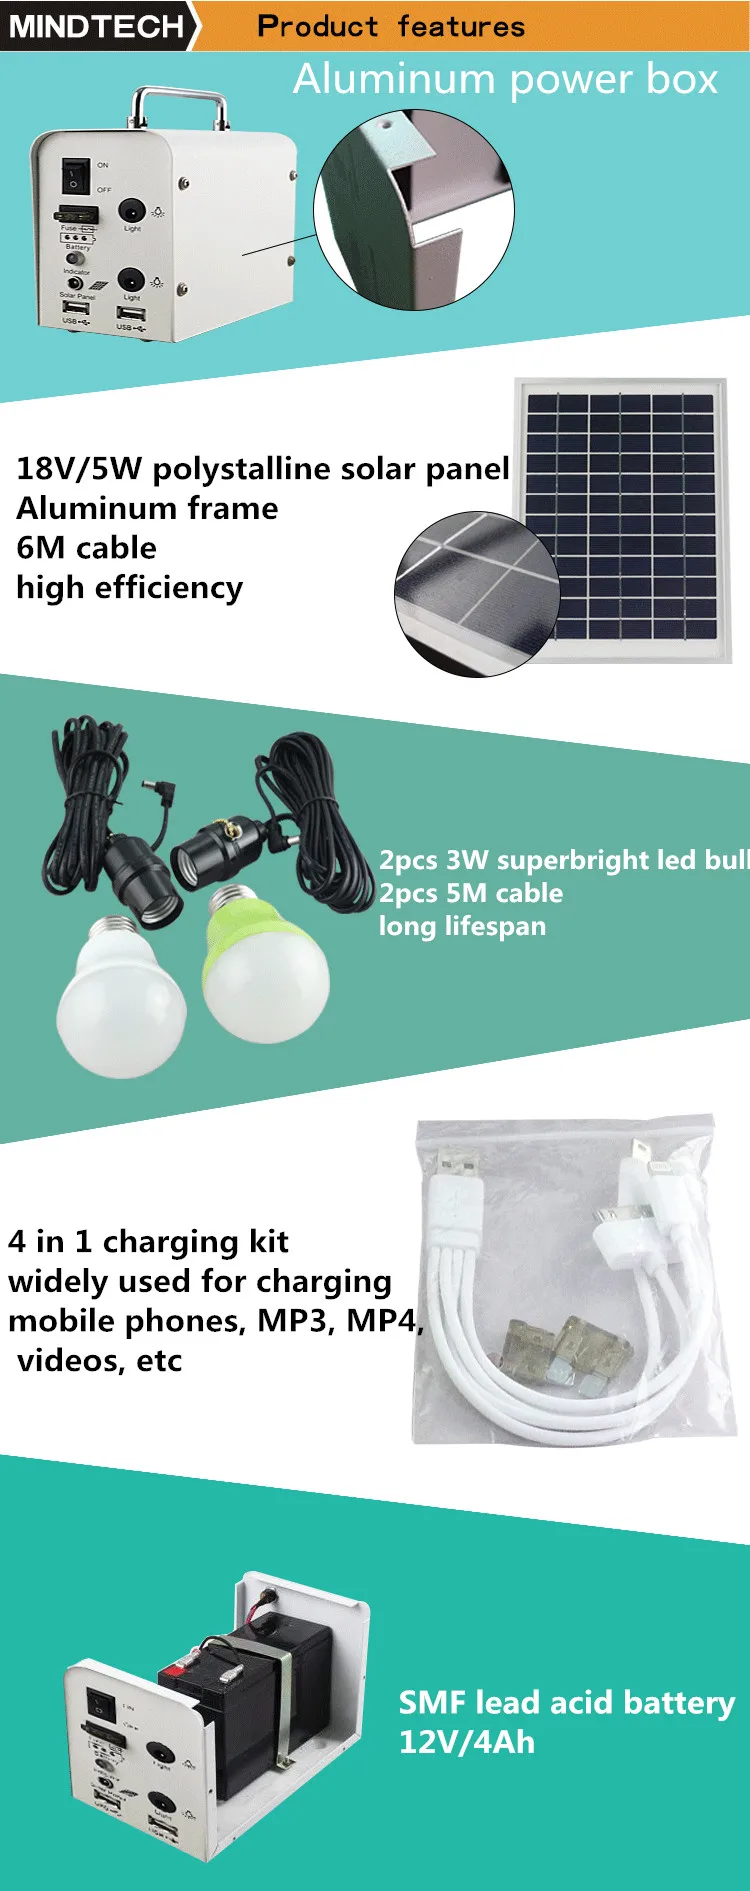 < Mindtech Solar> DC portable solar system with 10W 20W 30W for indoors